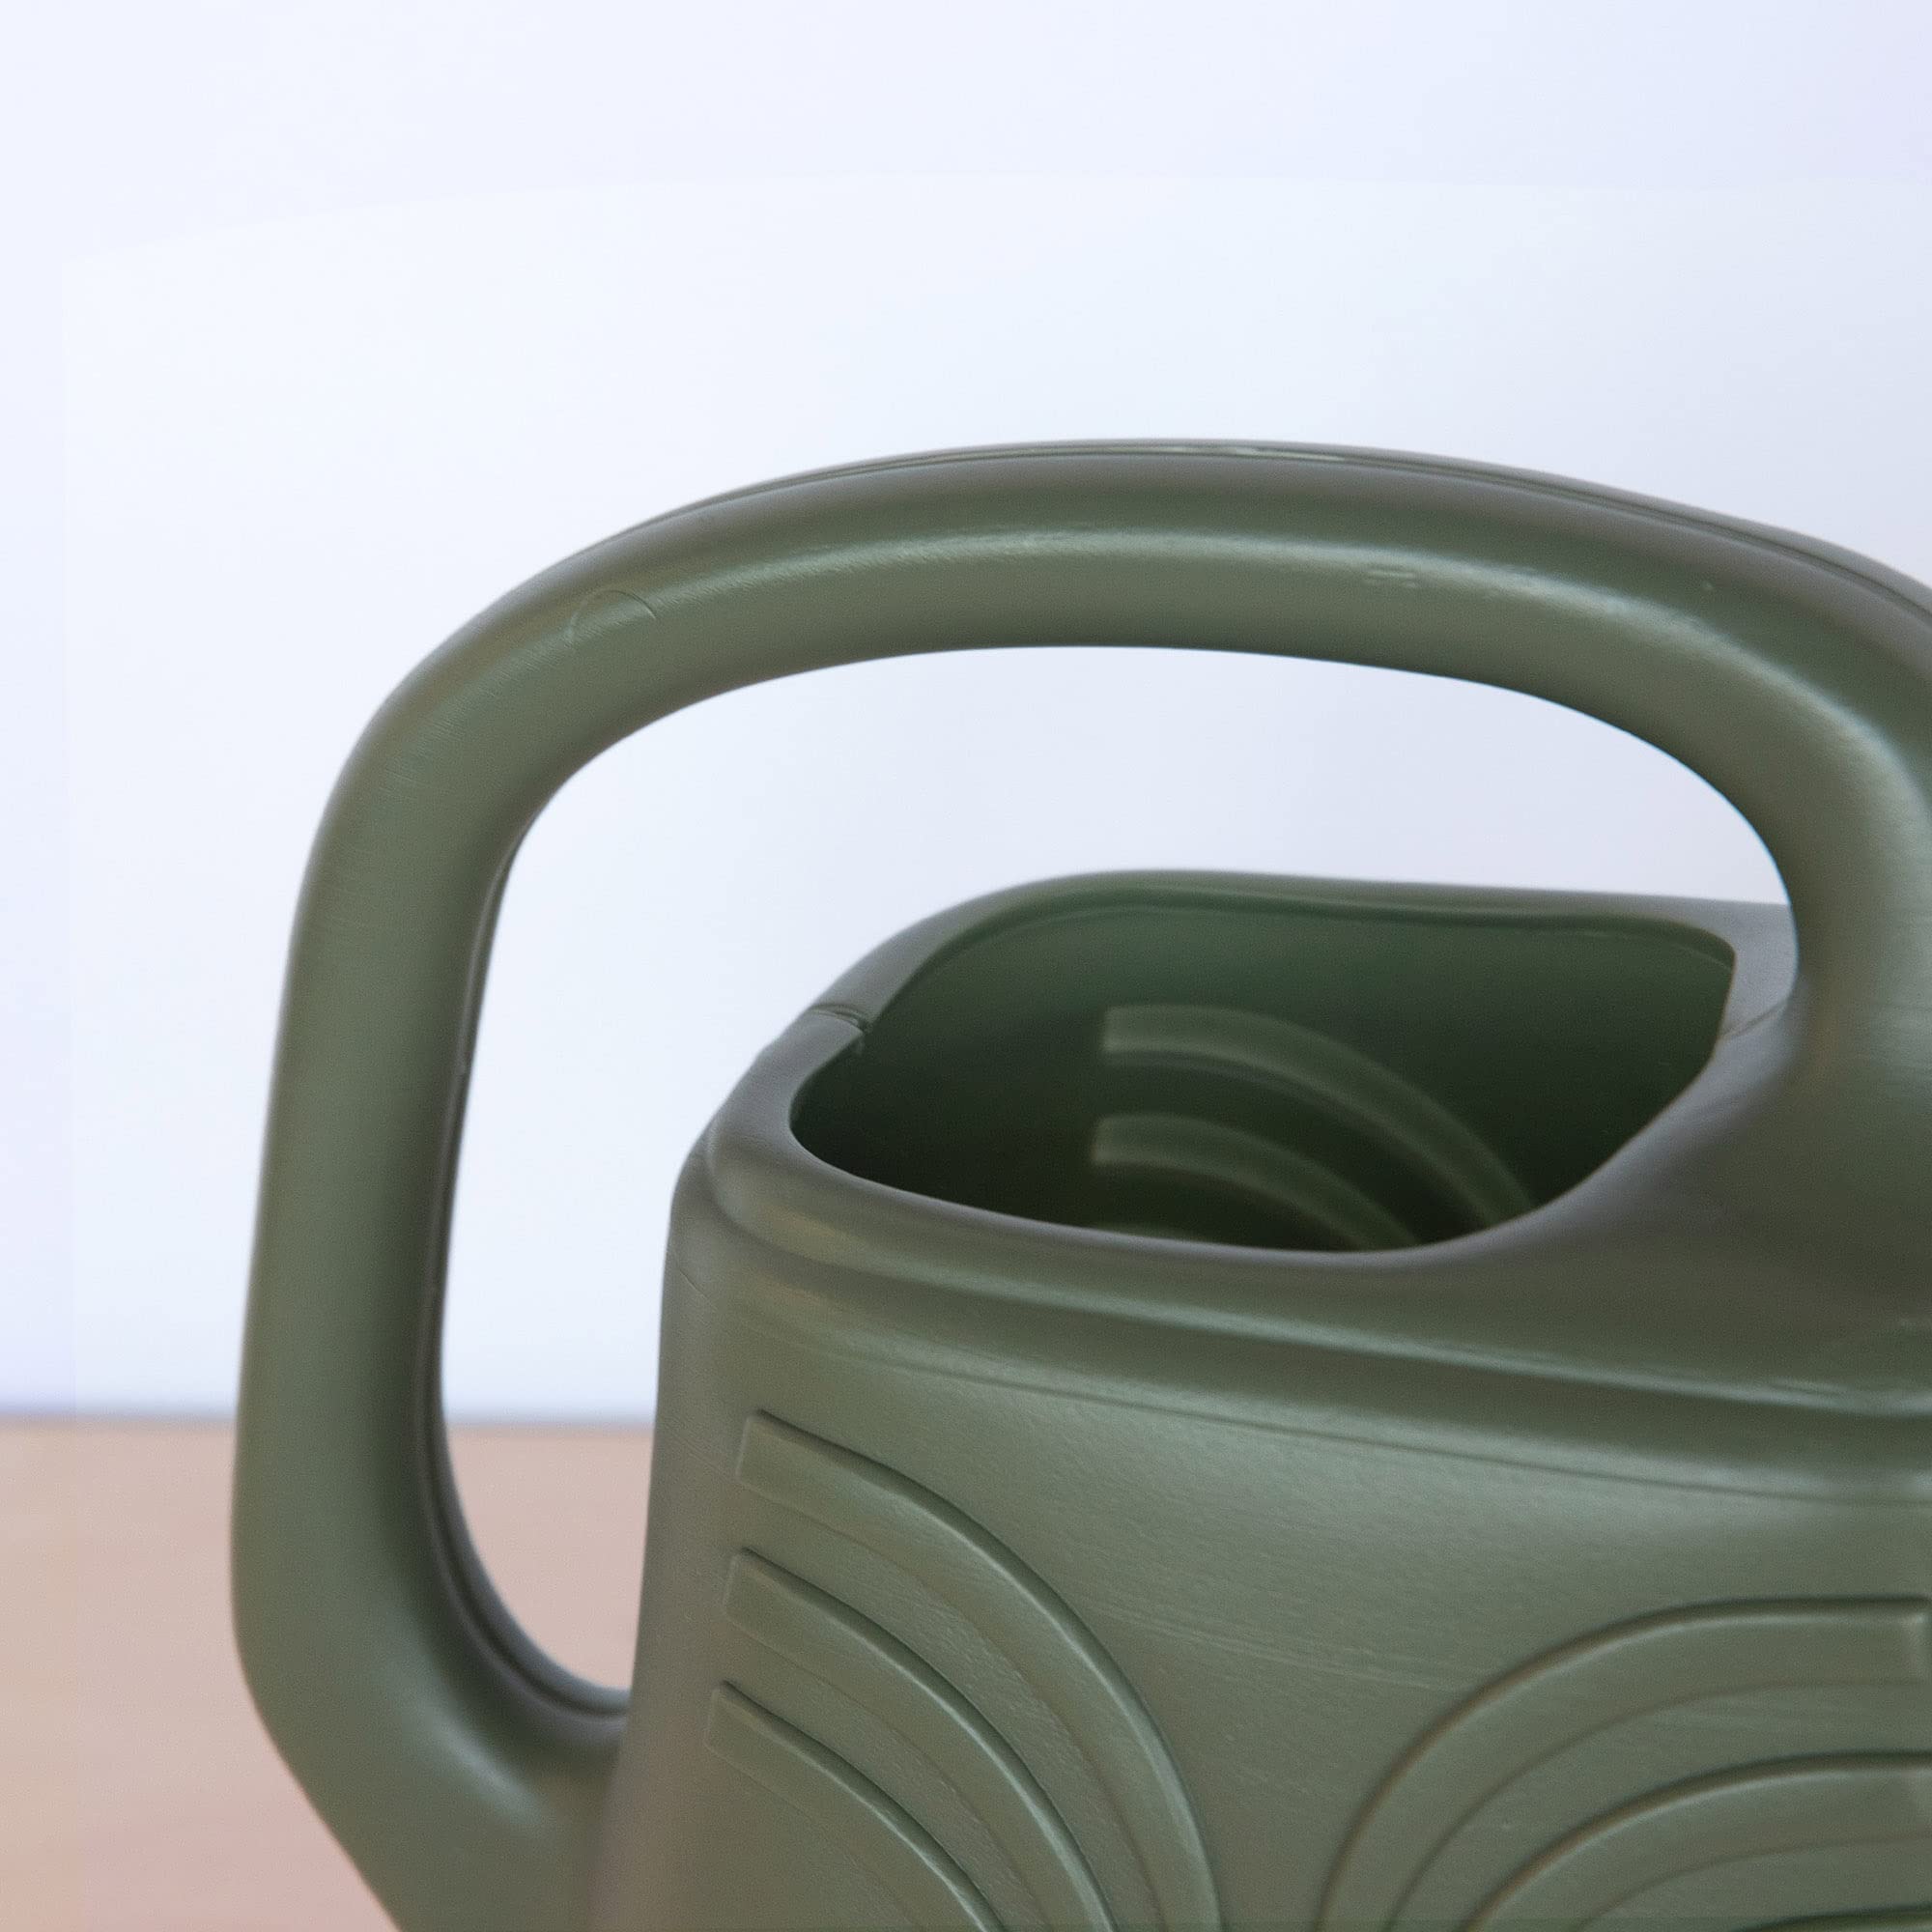 Bloem Promo Watering Can: 2 Gallon Capacity - Living Green - Durable Resin, Removable Nozzle Spout, Two Handles, Wide Mouth, for Indoor and Outdoor Use, Gardening